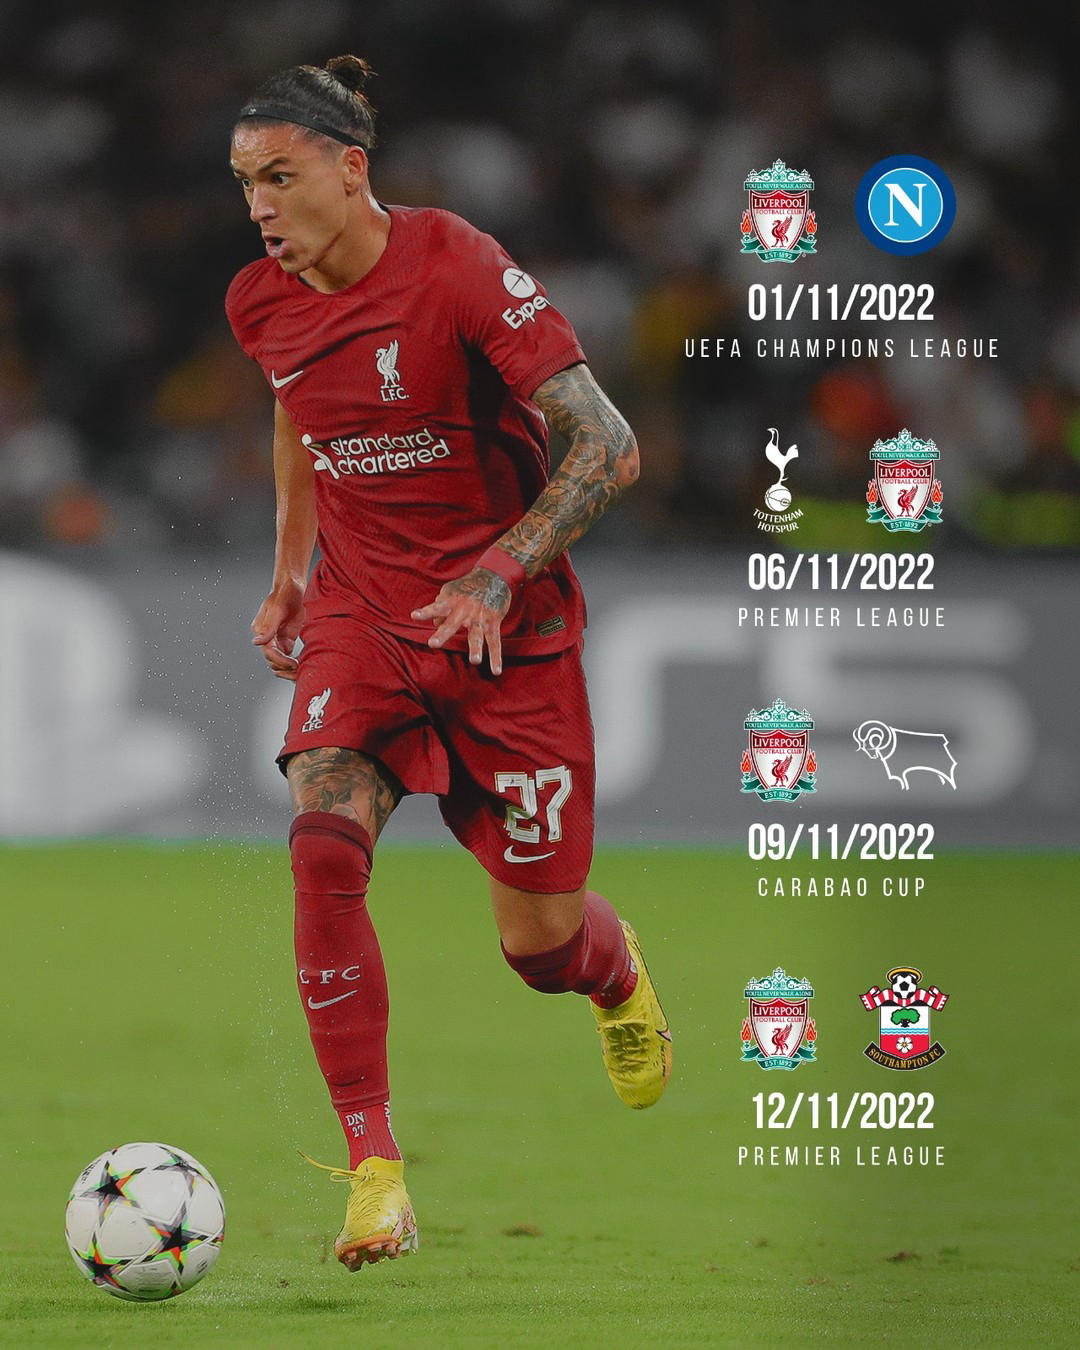 Liverpool Football Club - Our November fixtures